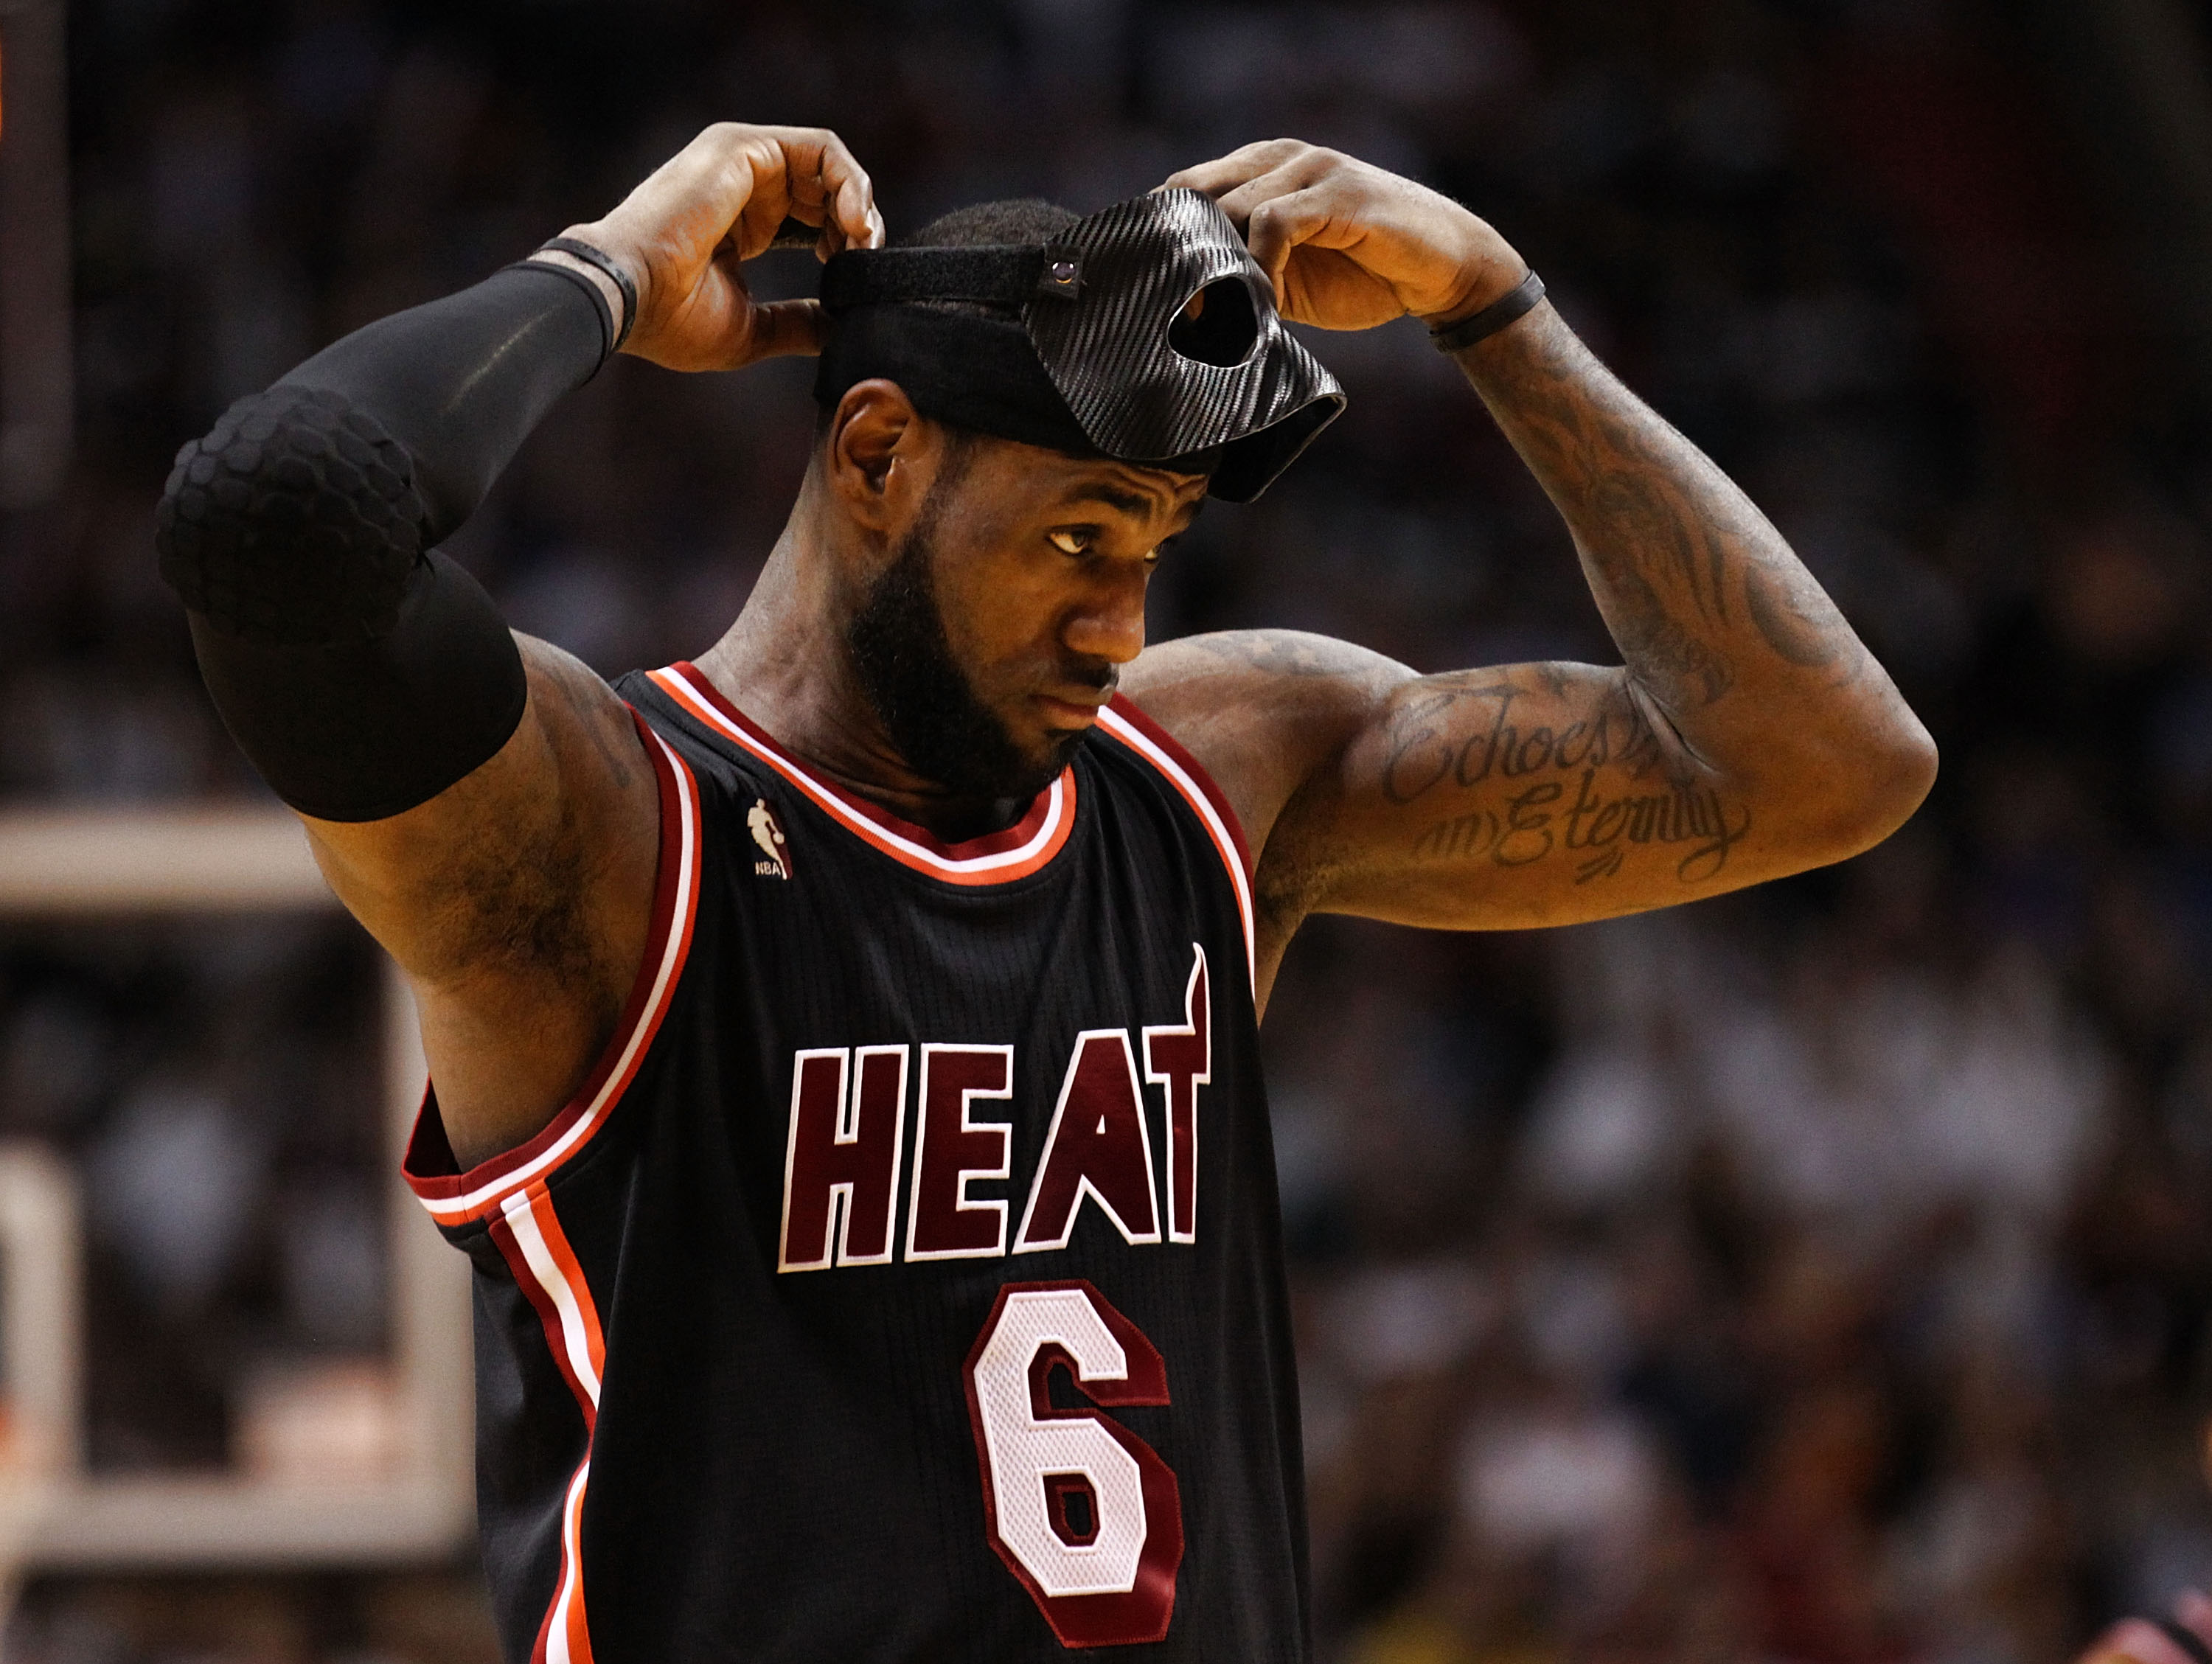 Bleacher Report on Twitter: "Seven years ago today, LeBron James pulled out the black mask in South Beach 🔥 He 31 points in a blowout win Melo and the